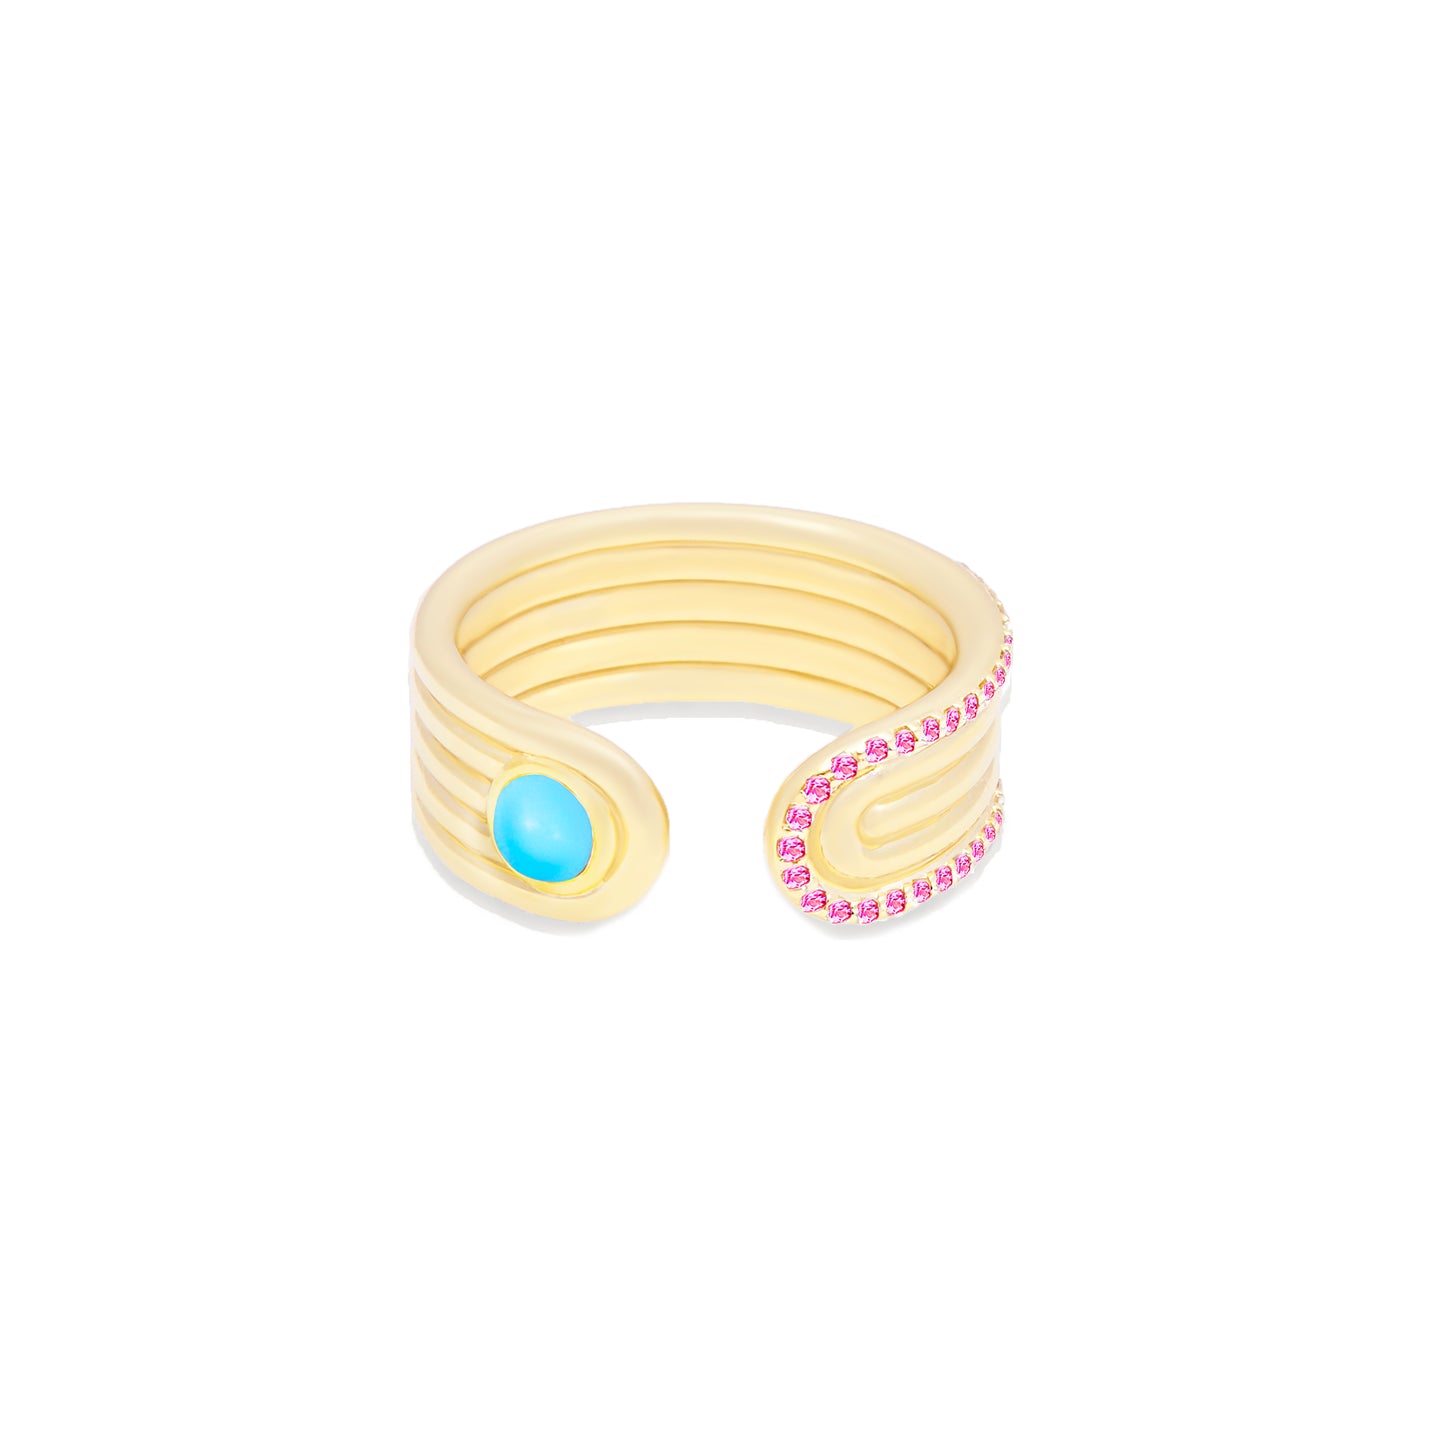 Found Cabochon Open Ring - Turquoise & Pink Sapphire